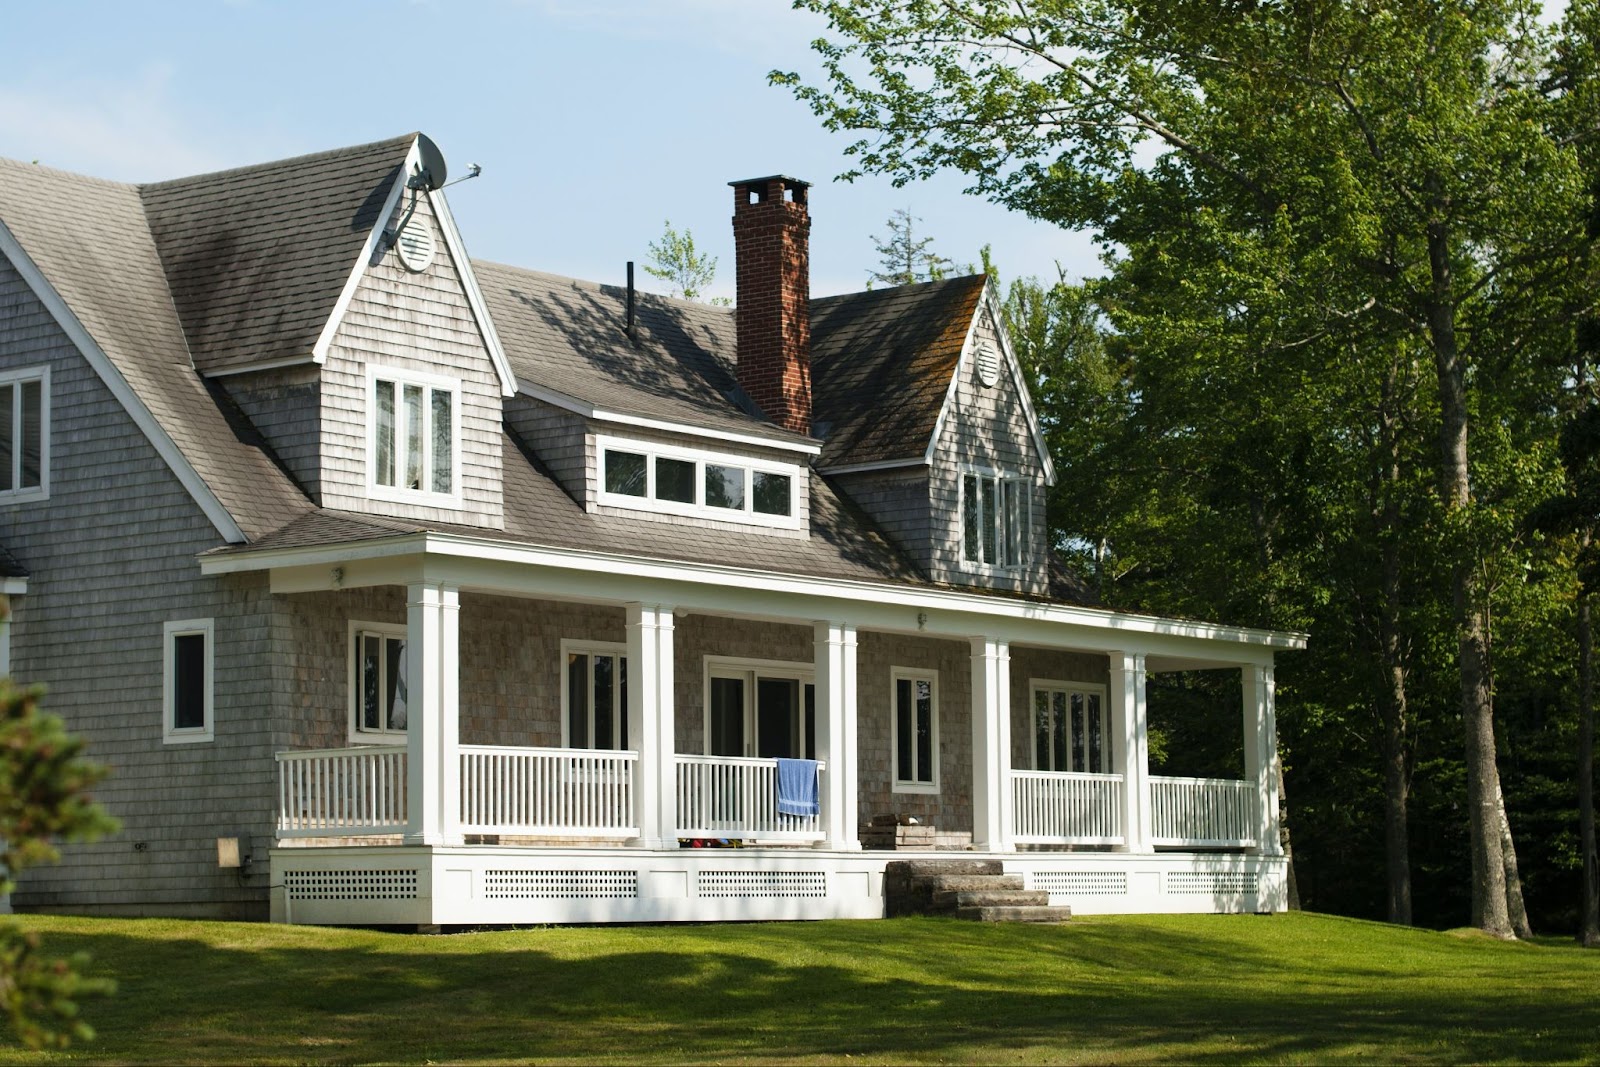 Planning for House Protection? Shop Hanover Homeowners Insurance!